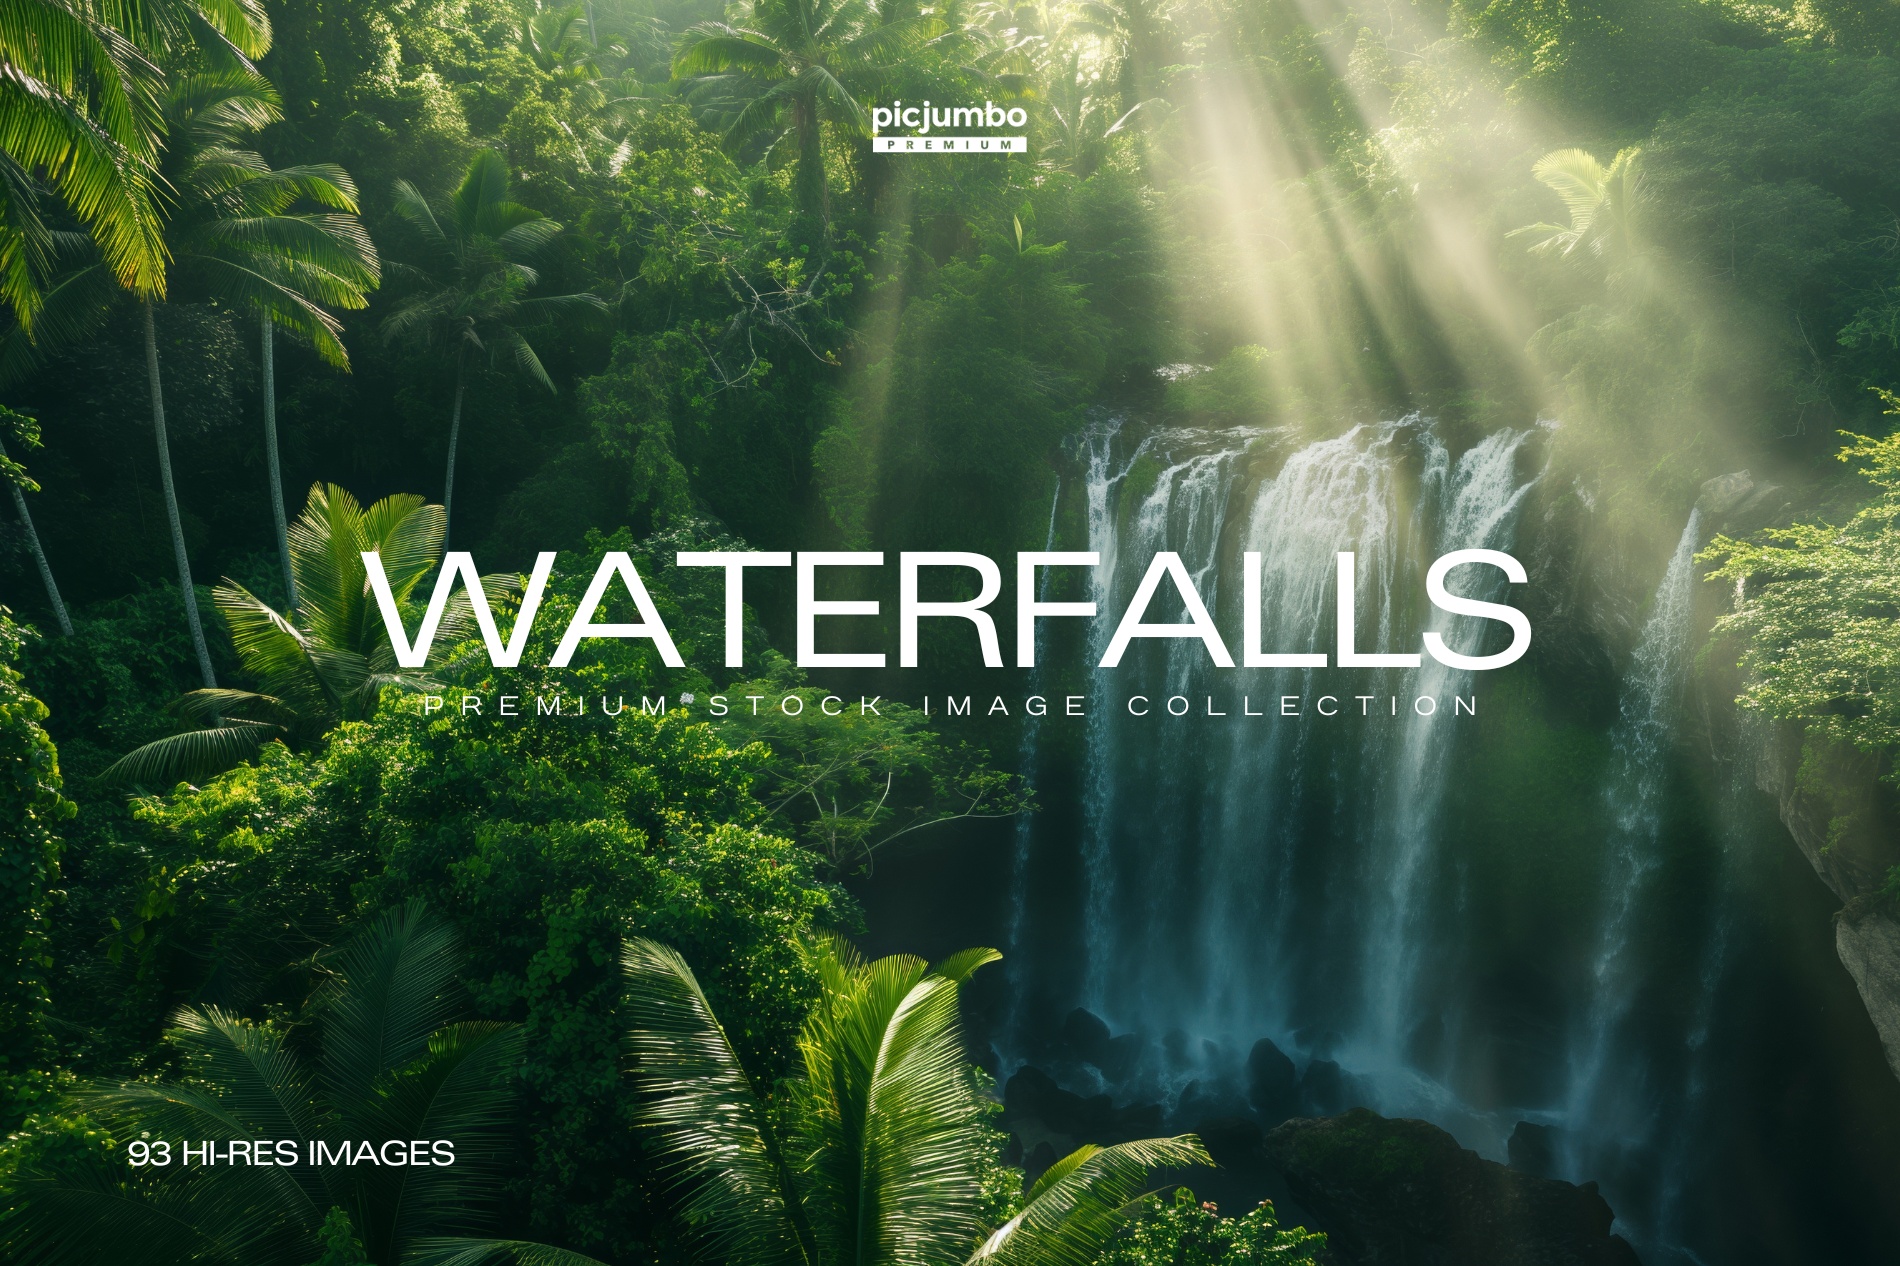 Download hi-res stock photos from our Waterfalls PREMIUM Collection!